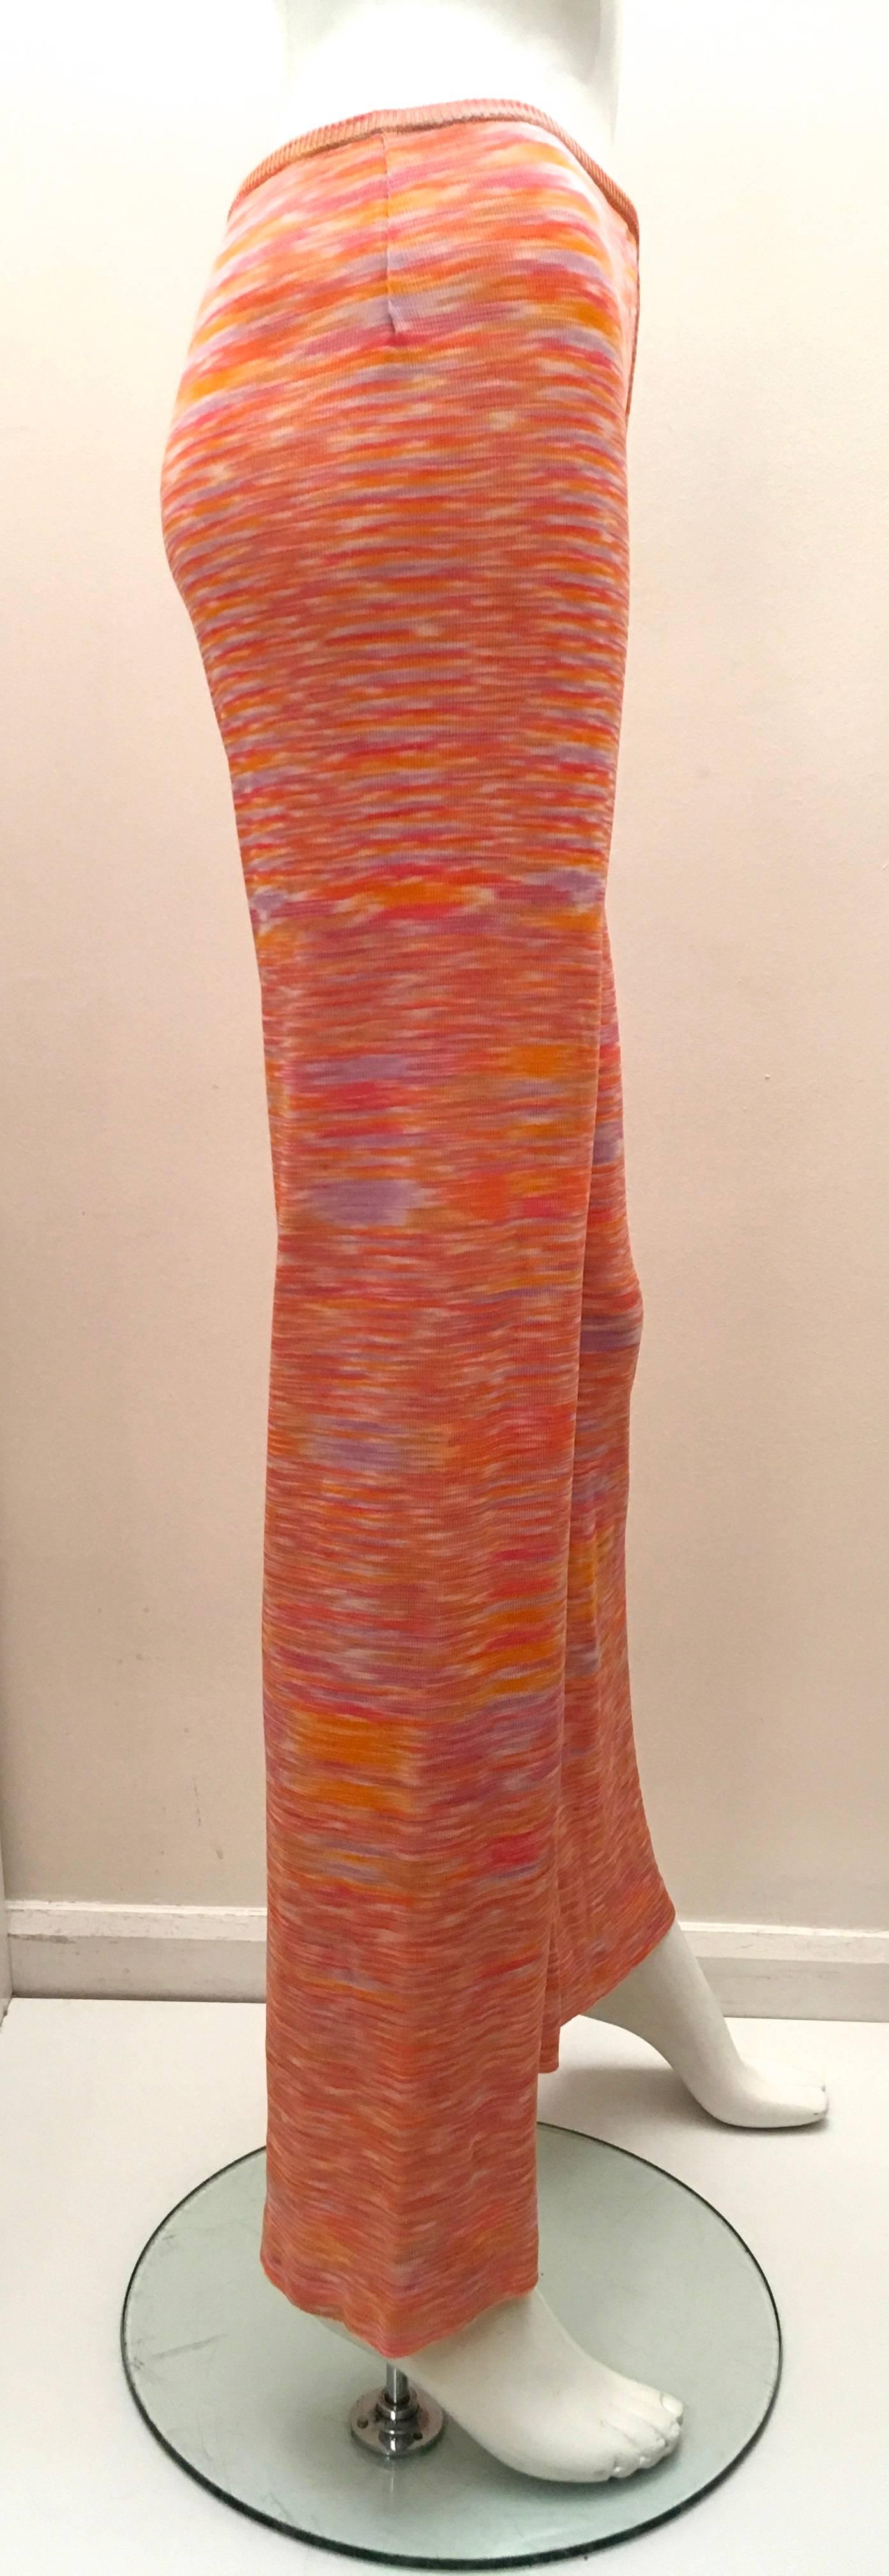 Presented here is a beautiful pair of pants from Missoni's brown label collection. The pants have the signature Missoni look and styling. The design is comprised of a beautiful combination of color shades of pastel oranges, pinks and purple tones.